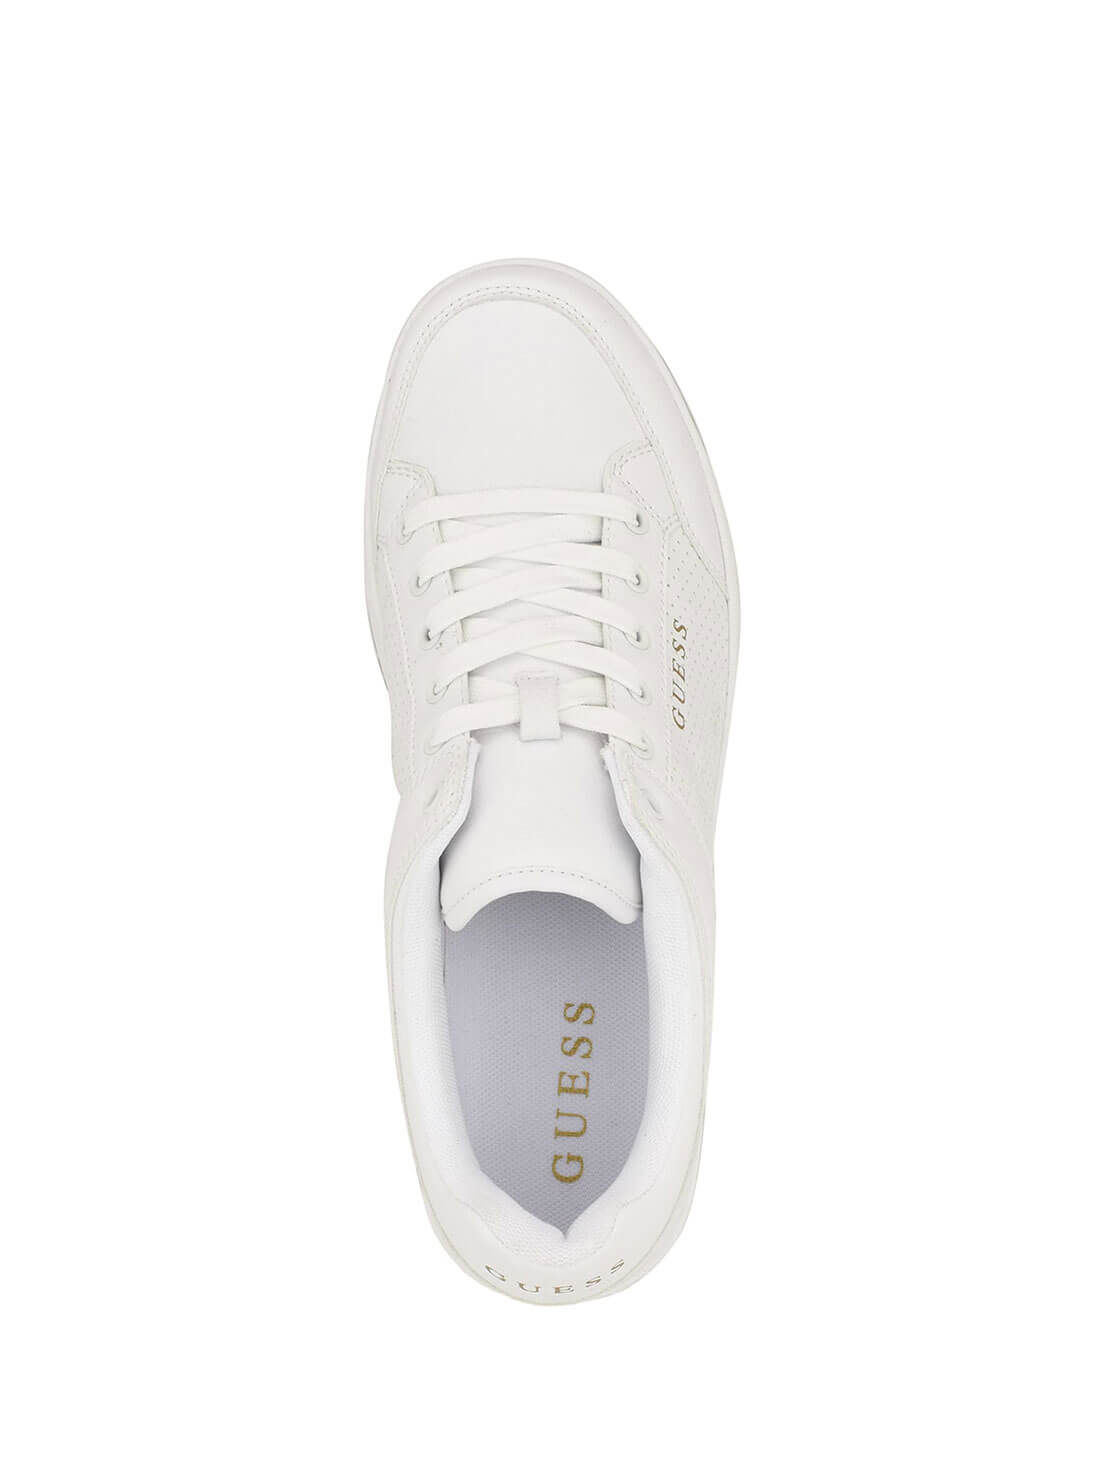 White Tempo Sneakers | GUESS Men's Shoes | top view